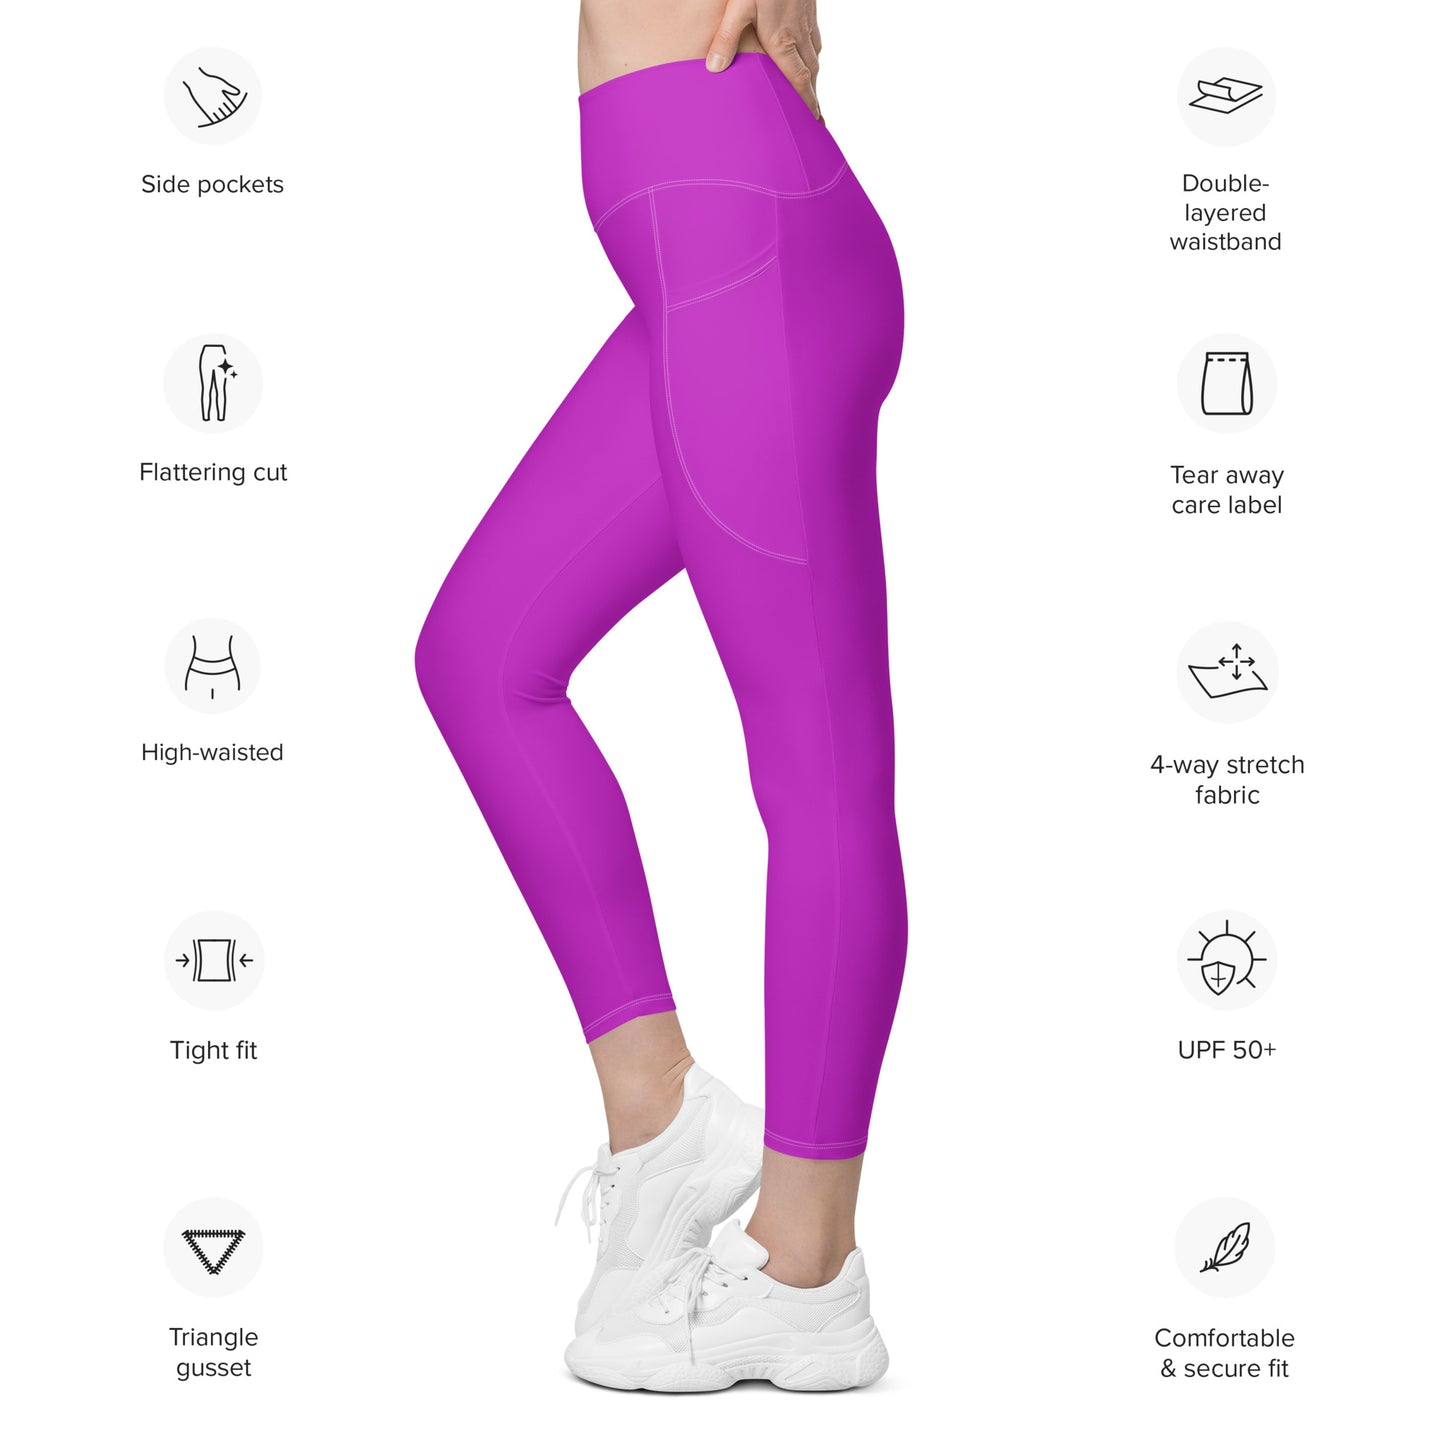 Alpenrose Solid Color High Waist 7/8 Recycled Yoga Leggings / Yoga Pants with Pockets